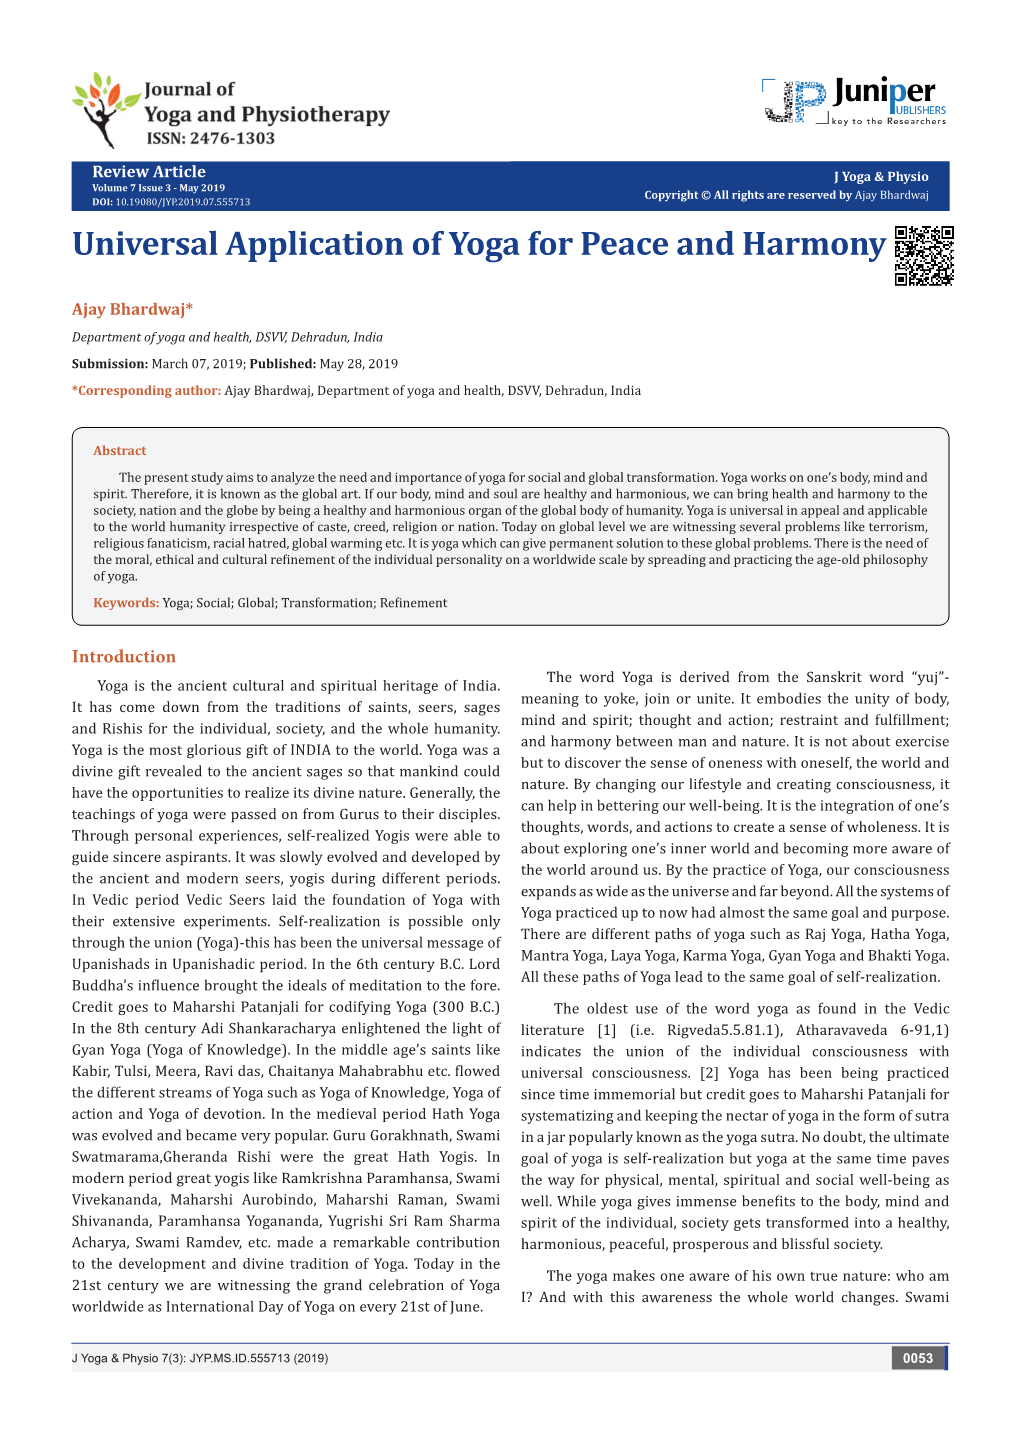 Universal Application of Yoga for Peace and Harmony